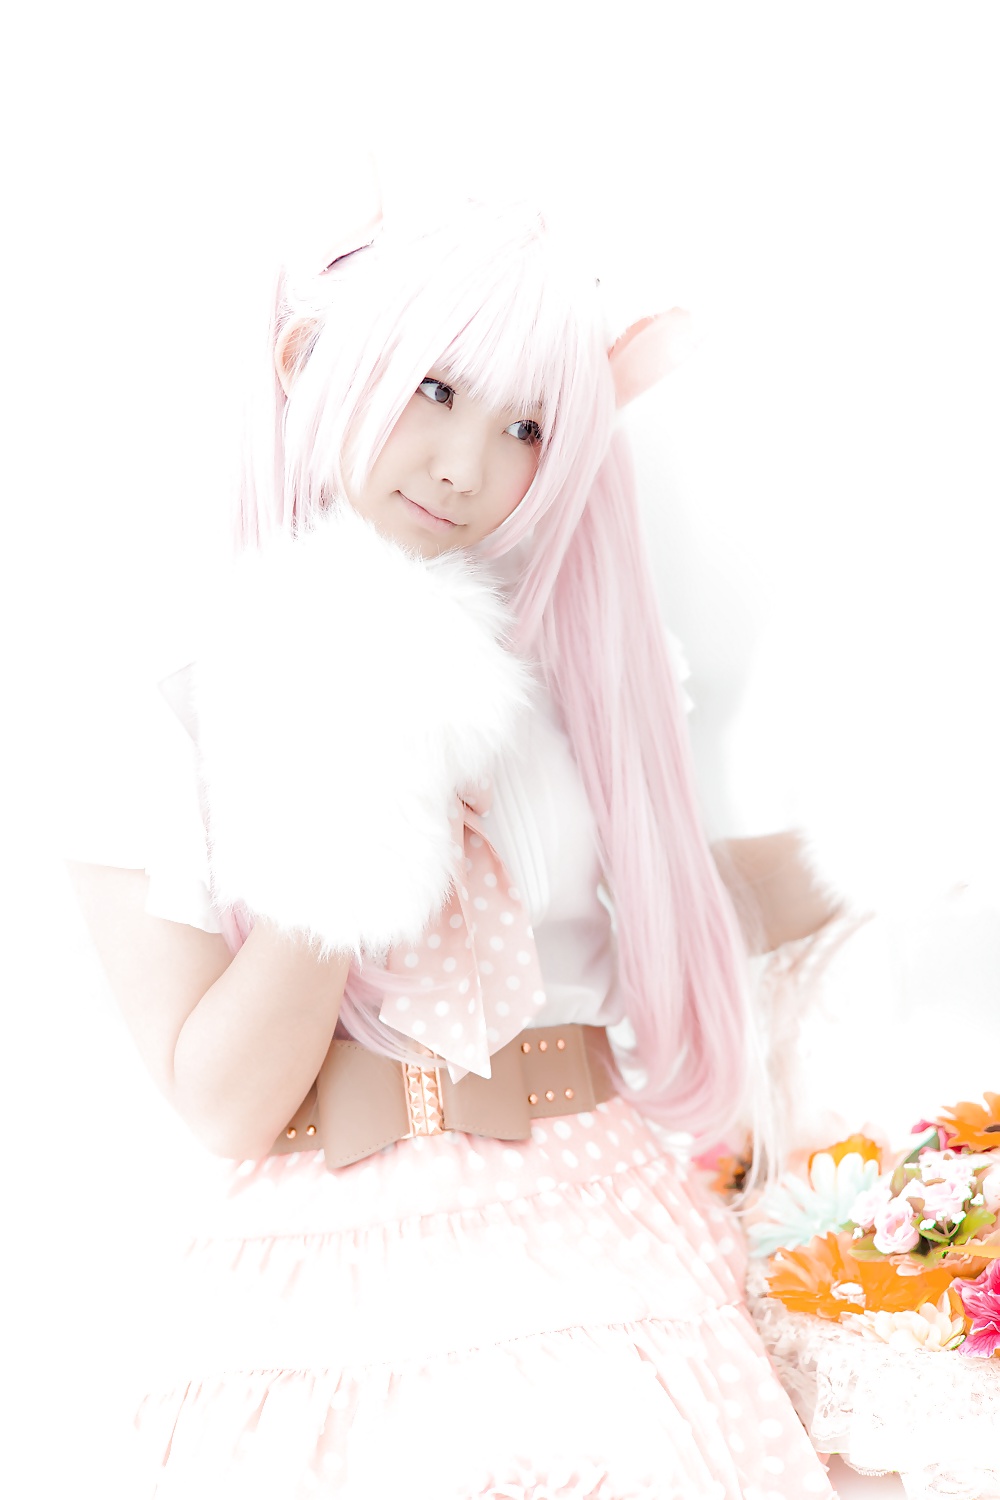 Asiatica cosplay in bianco
 #26558762